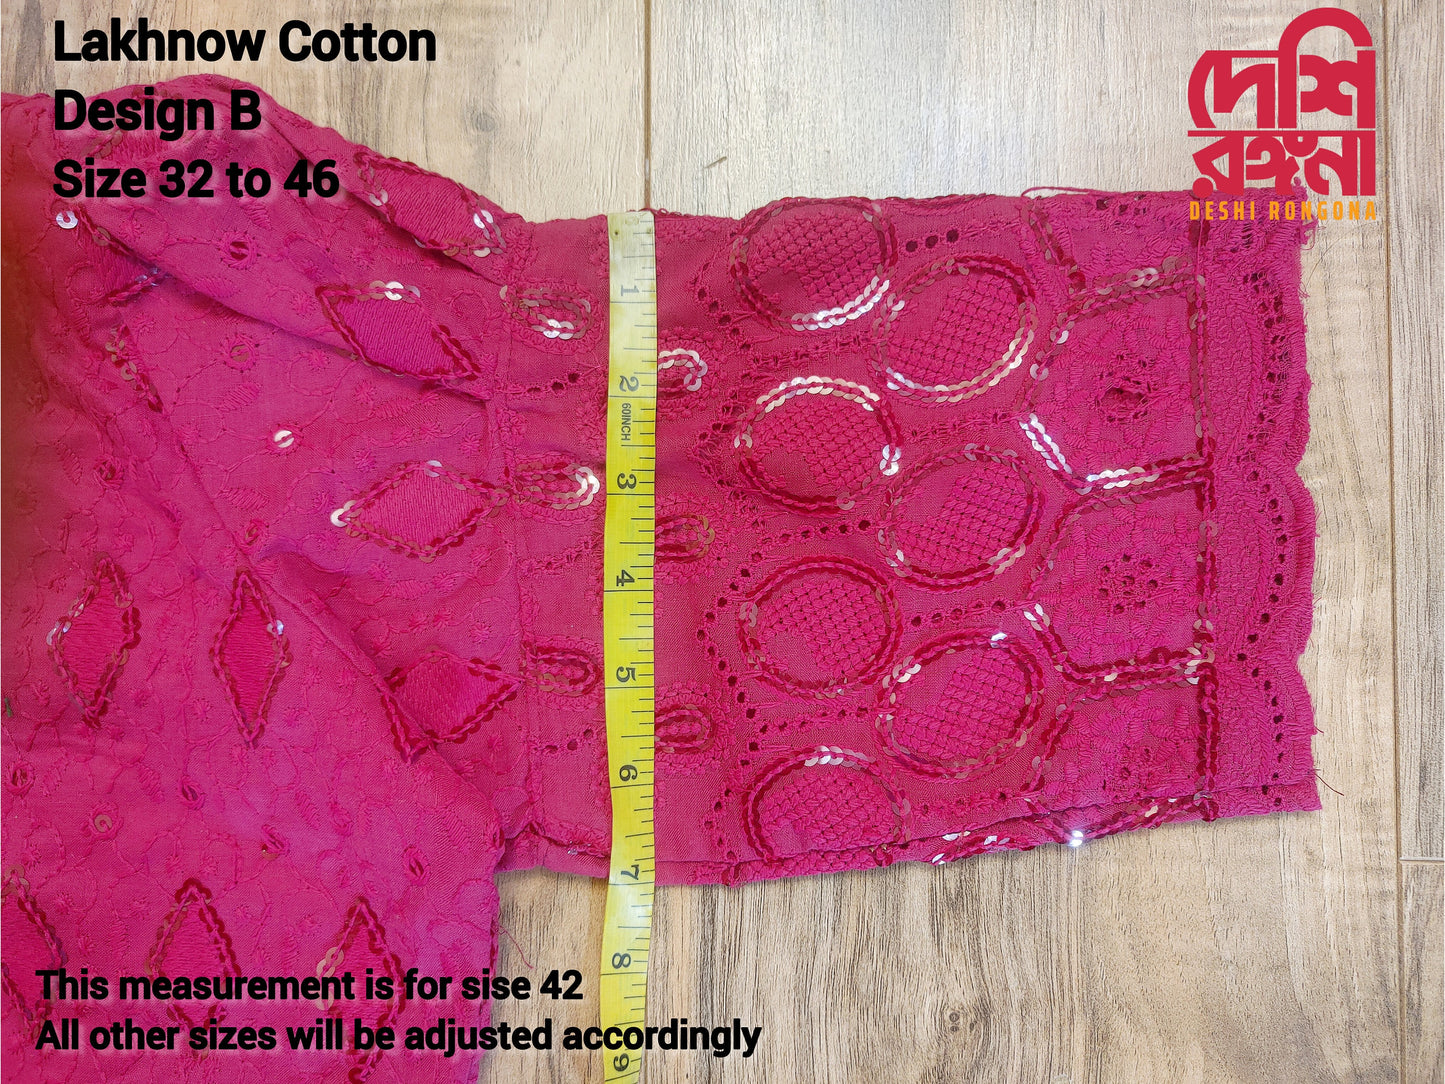 Readymade Lakhnaw Cotton Blouse, Magenta Readymade Designer Blouse, Embroidered, Comfortable, goes with any contrast saree of your closet